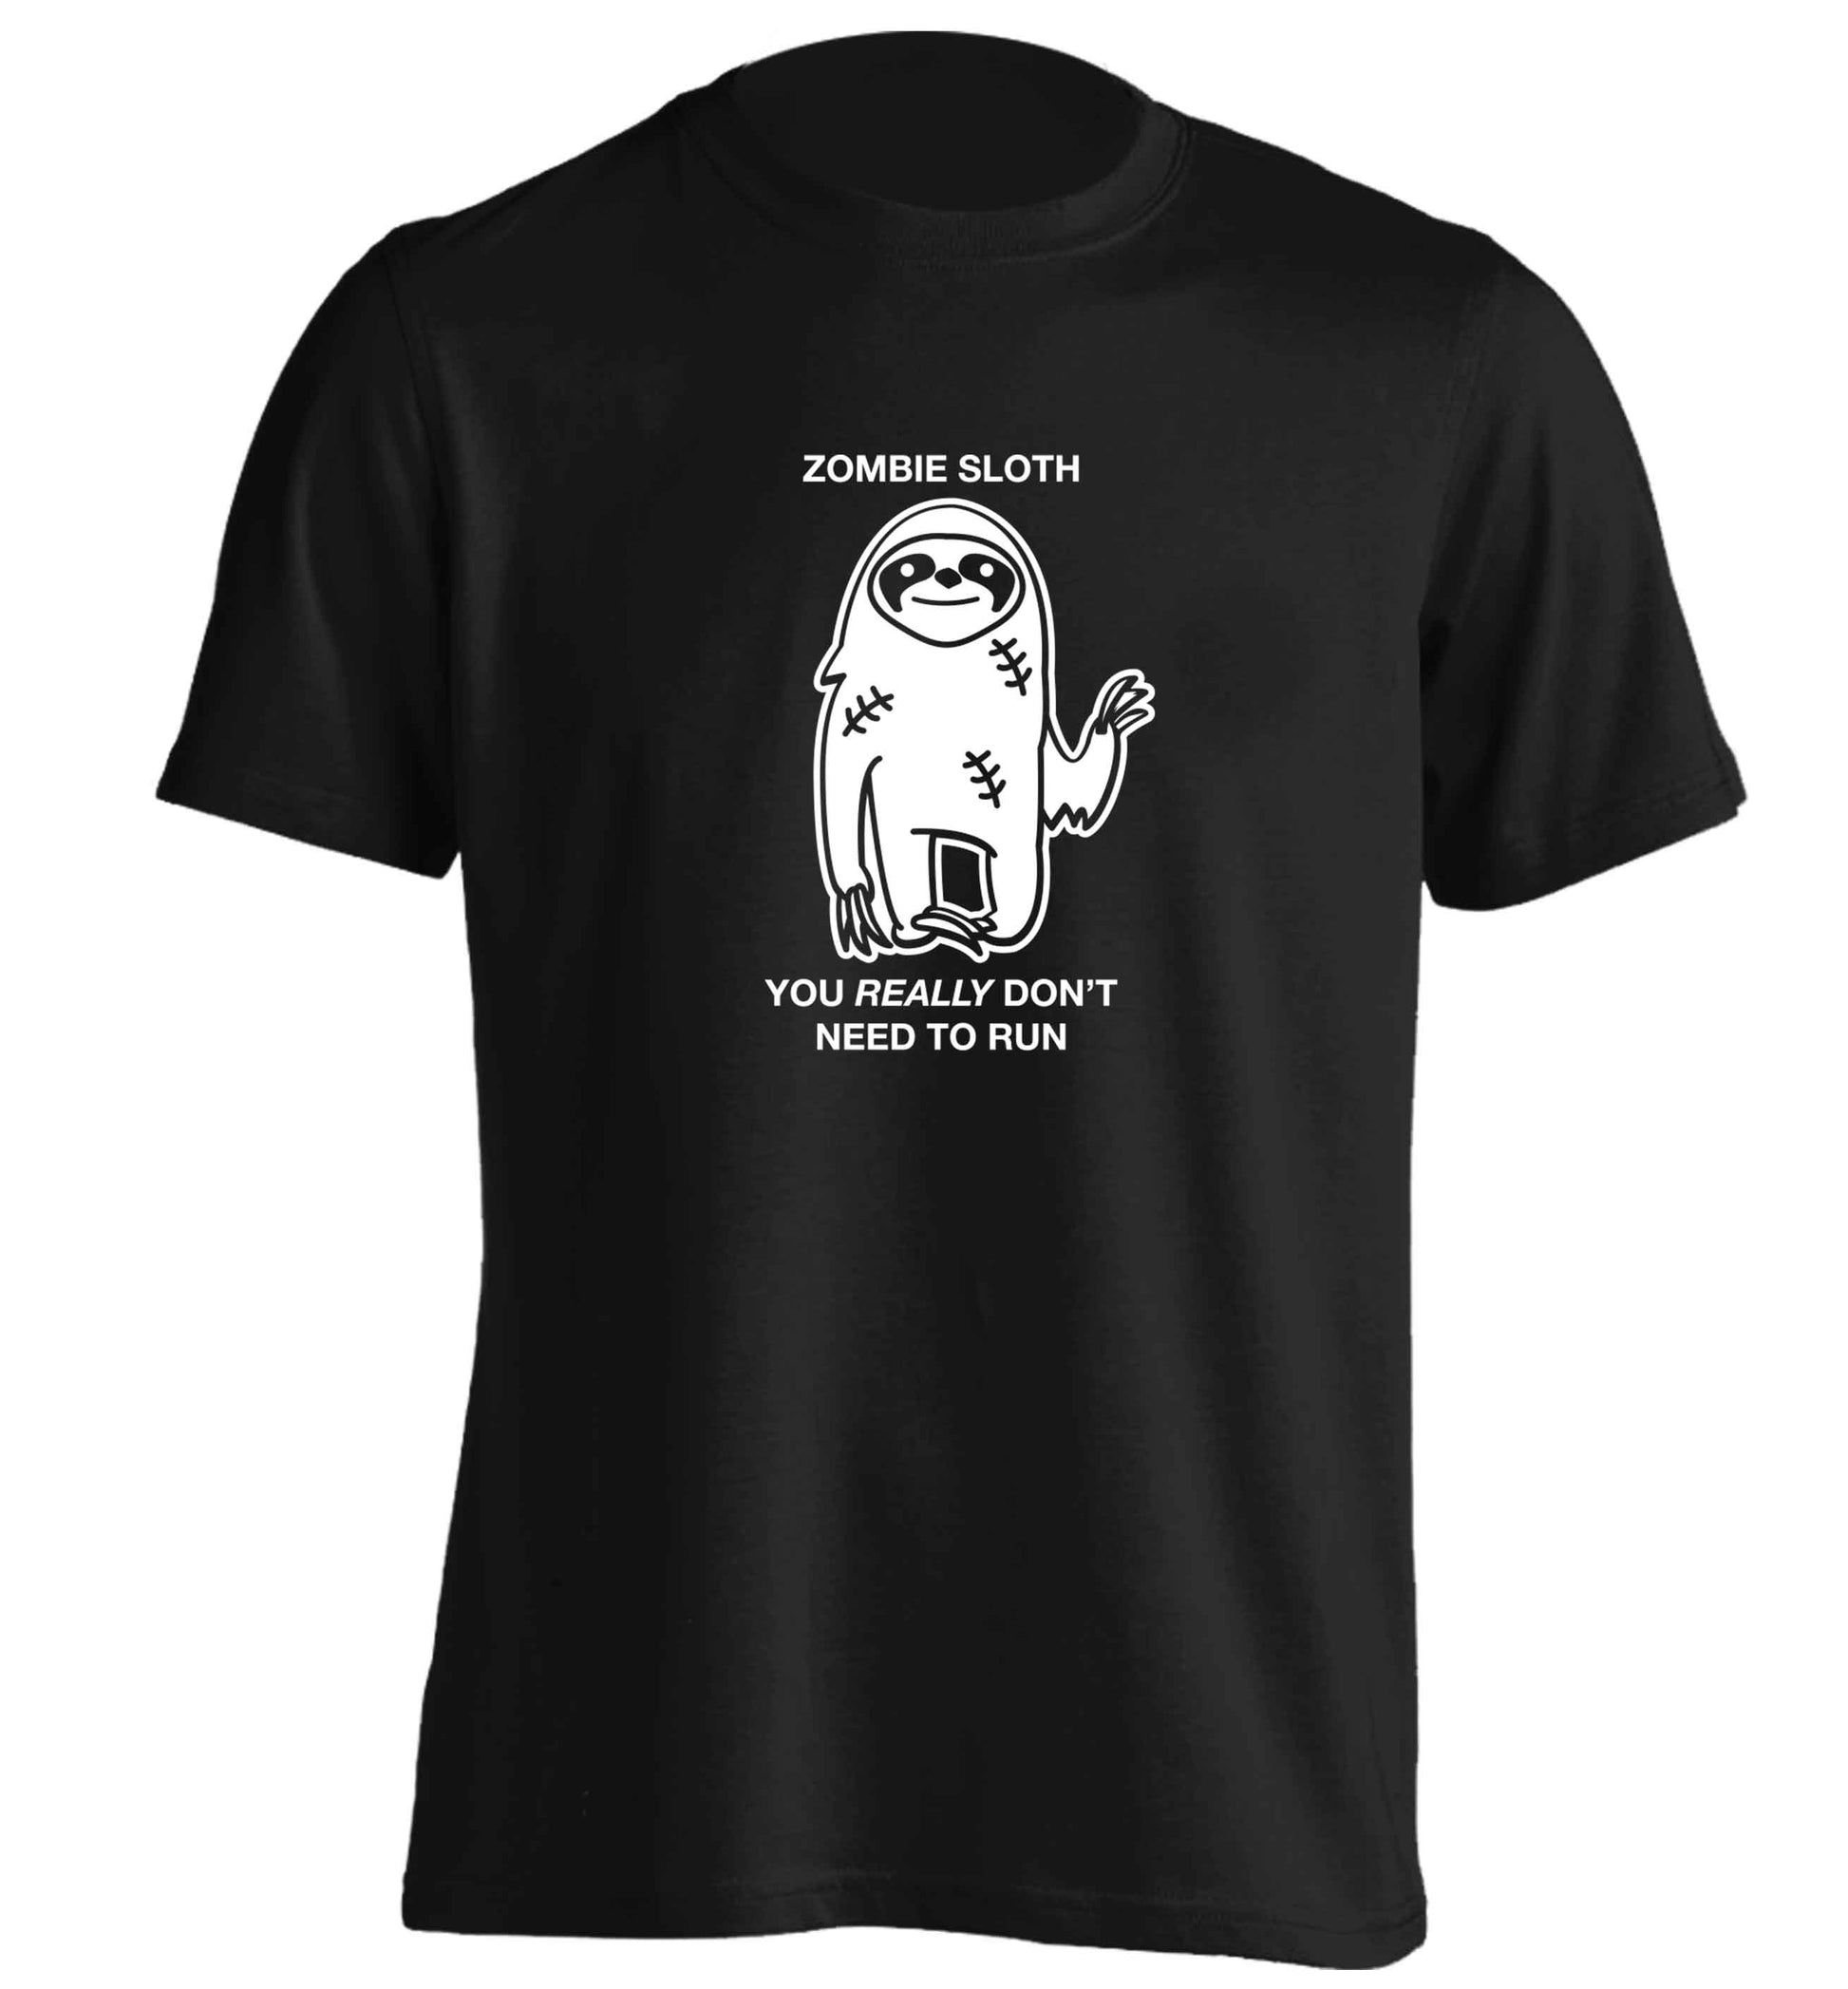 Zombie sloth you really don't need to run adults unisex black Tshirt 2XL